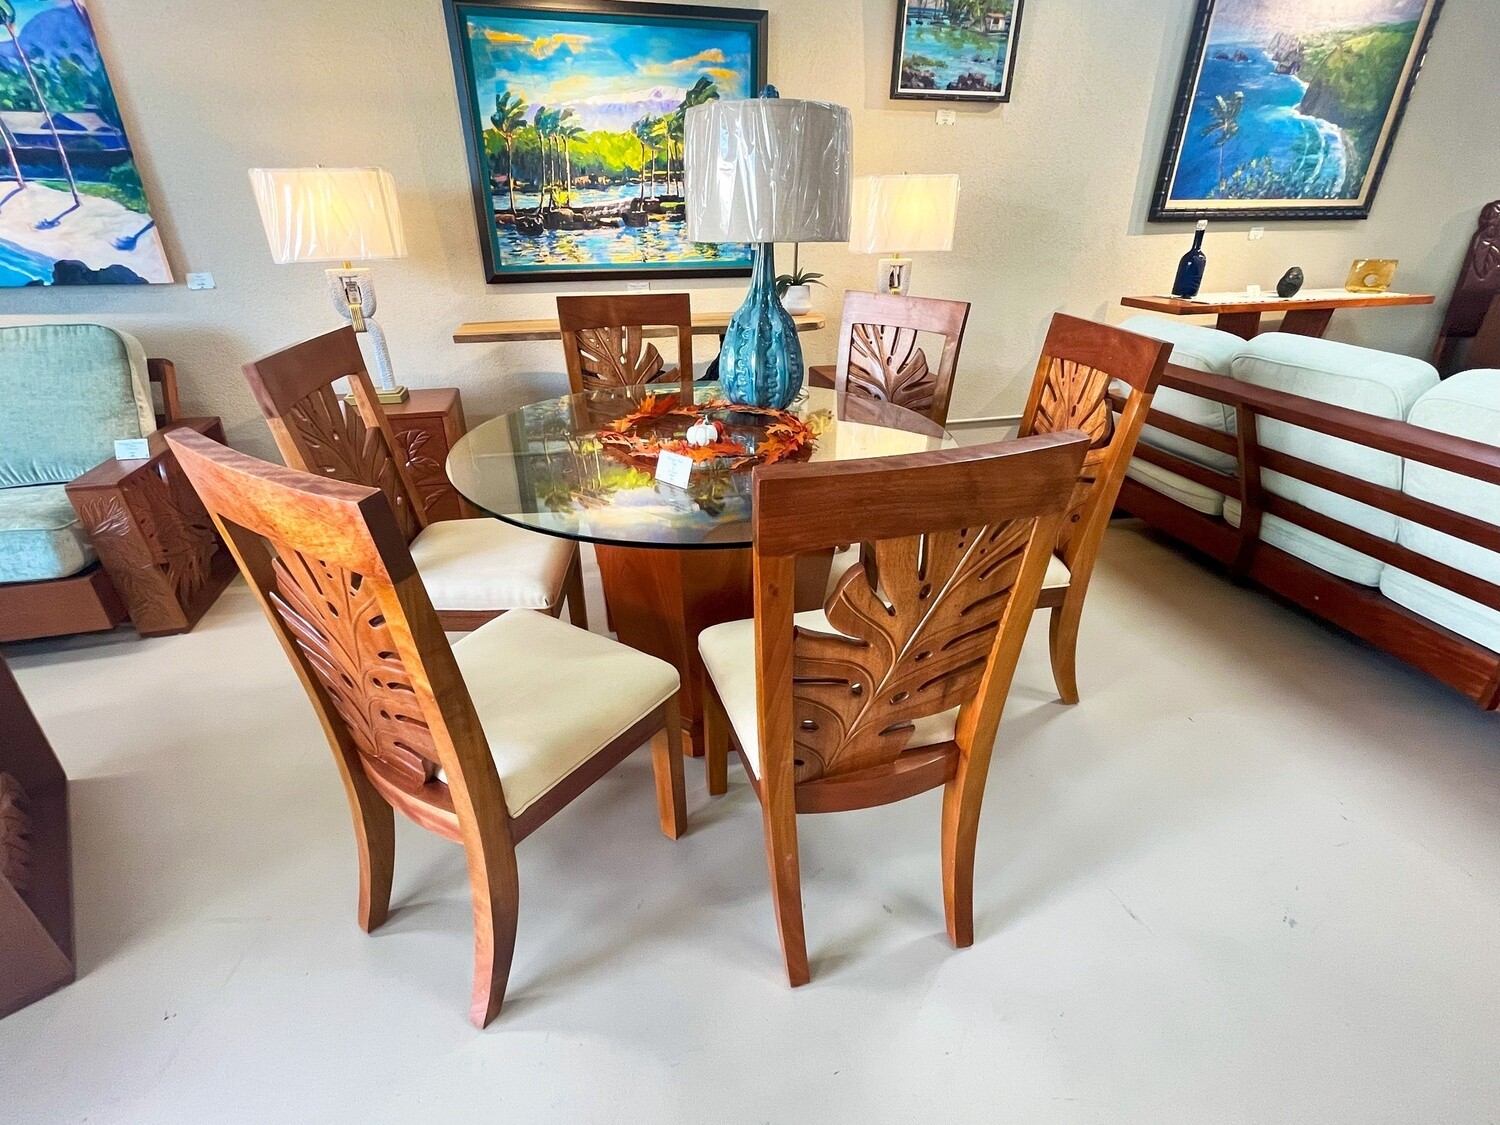 Budji Dining Table & 6 Chairs set